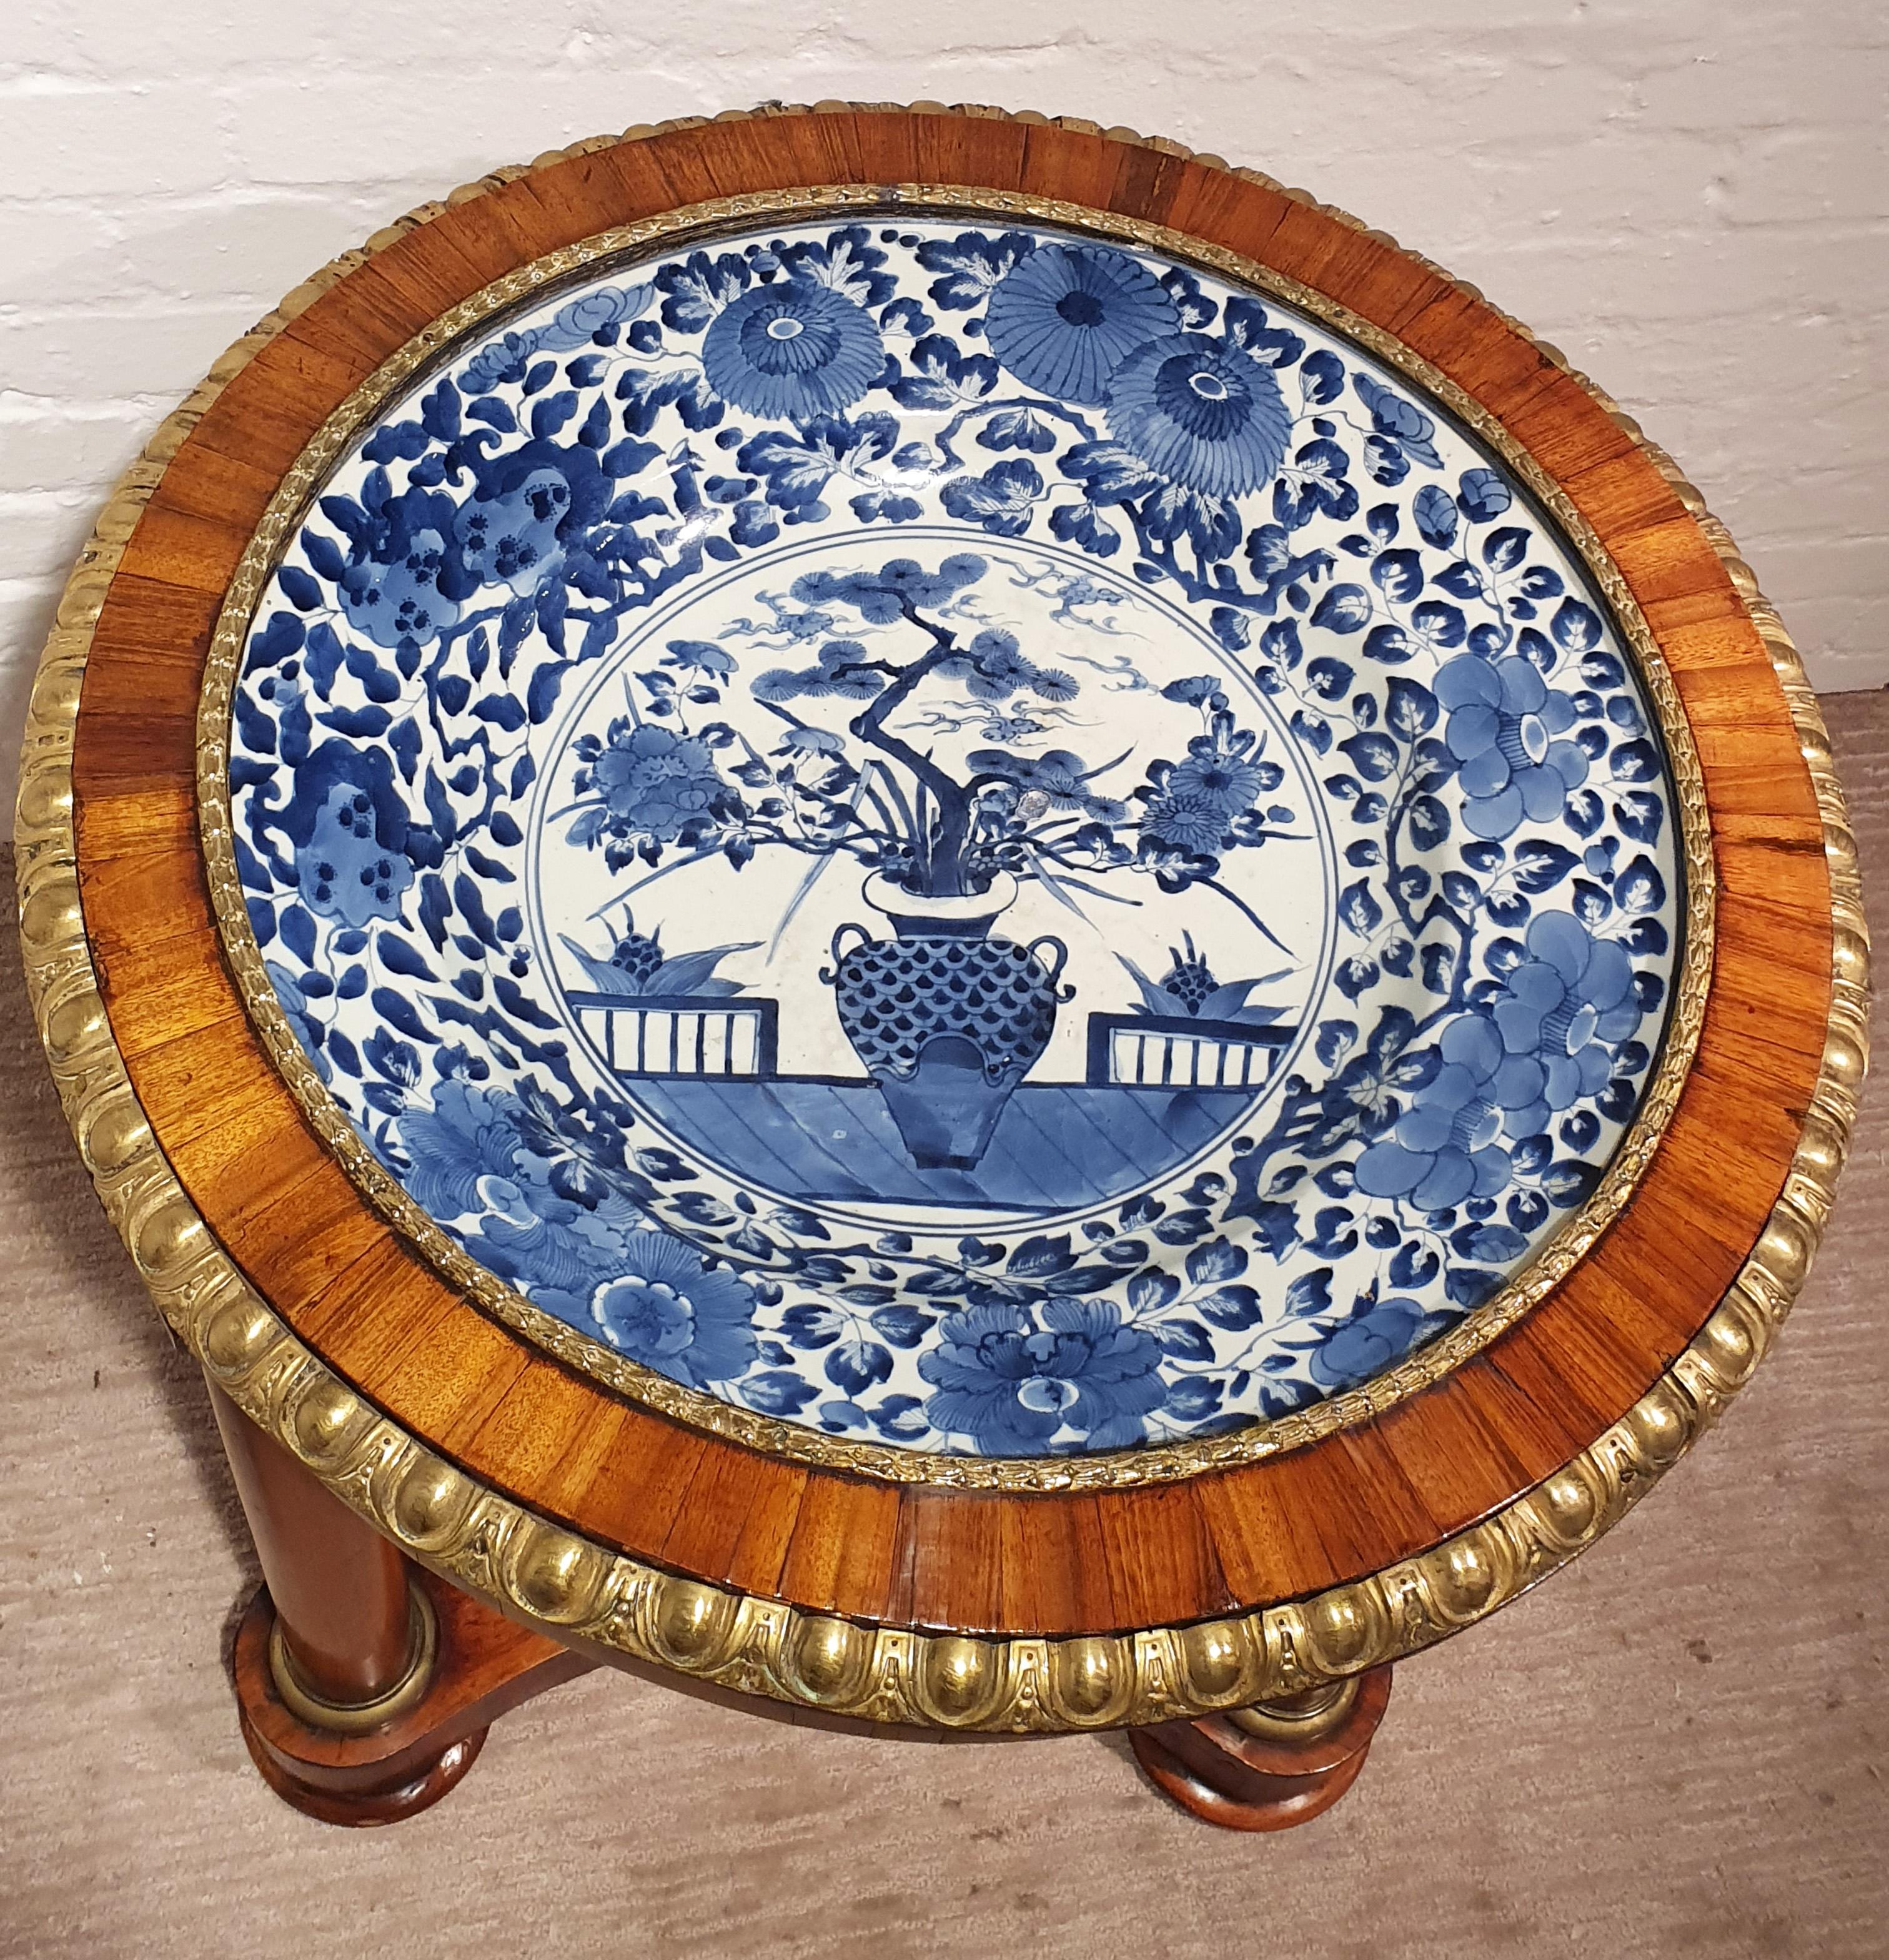 19th Century 18th Century Porcelain Dish with Rosewood Display Table